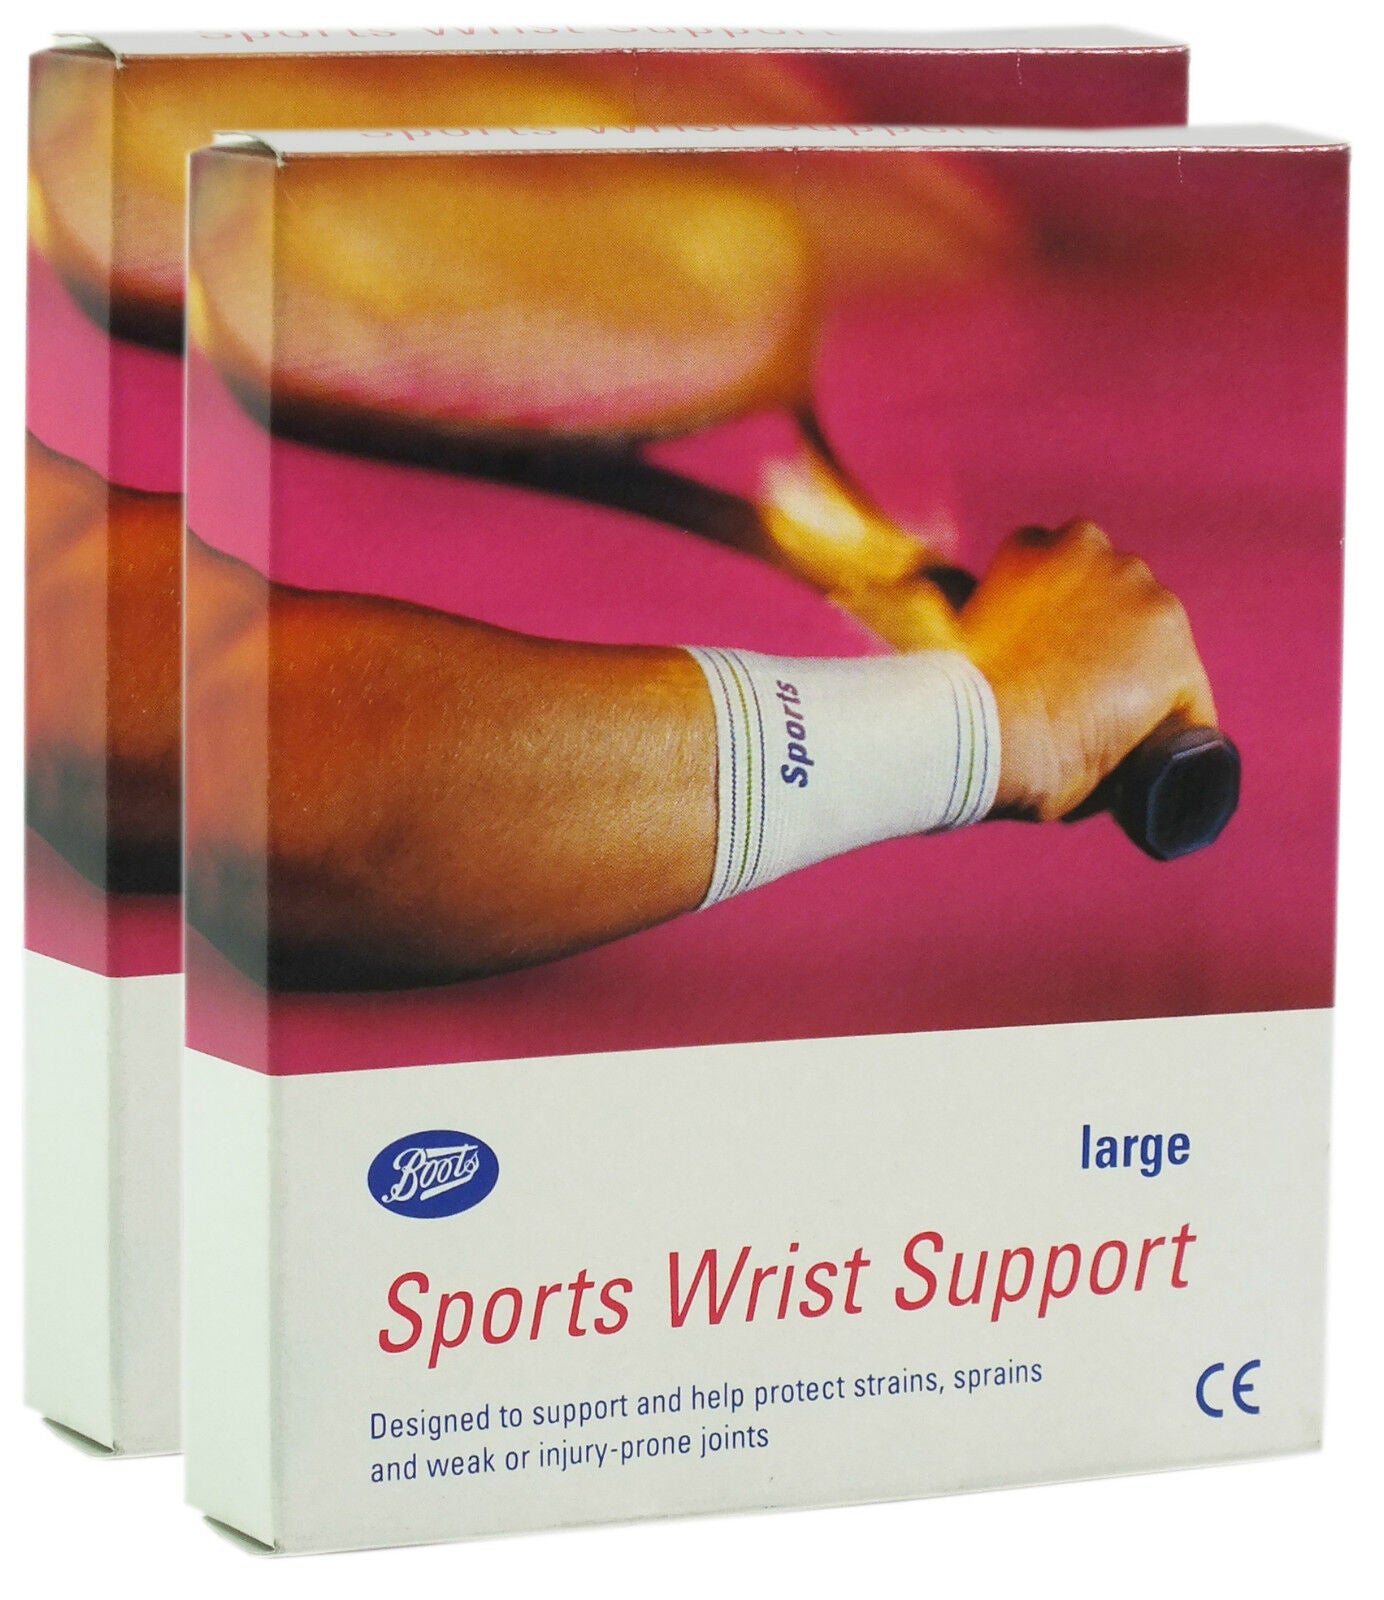 Boots Sports Wrist Support Size Large 19cm – 20.3cm